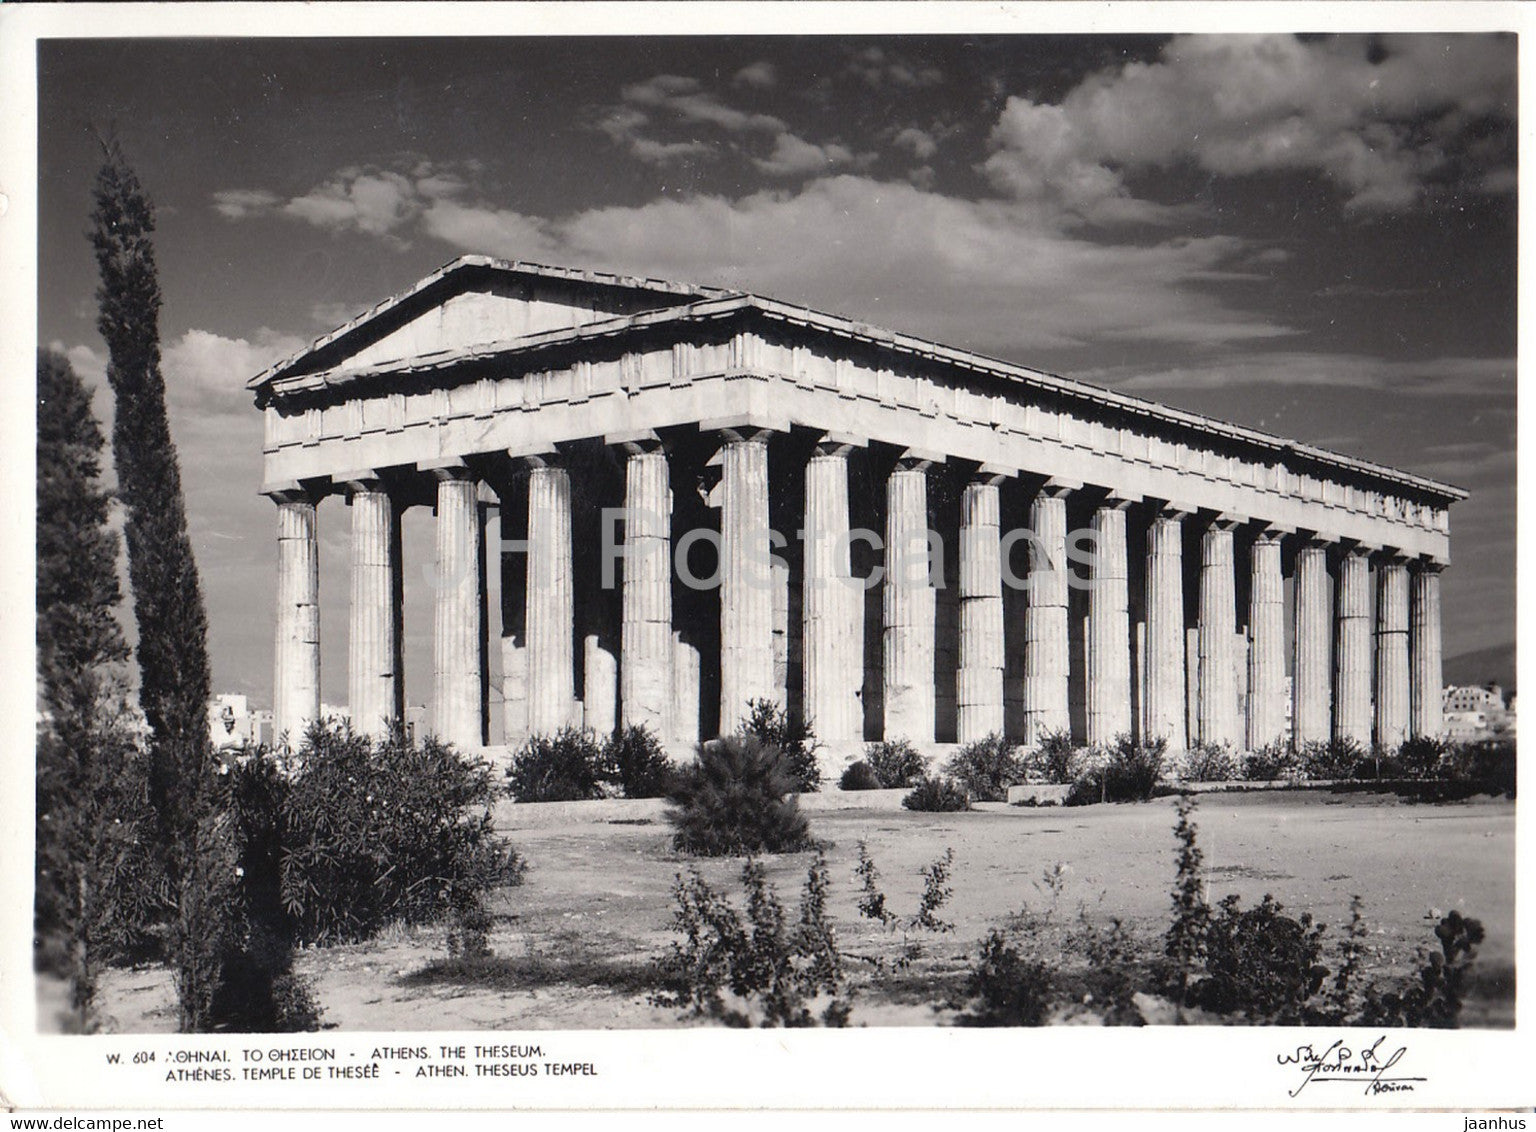 Athens - Theseus Temple - ancient - 604 - 1960 - Greece - used - JH Postcards